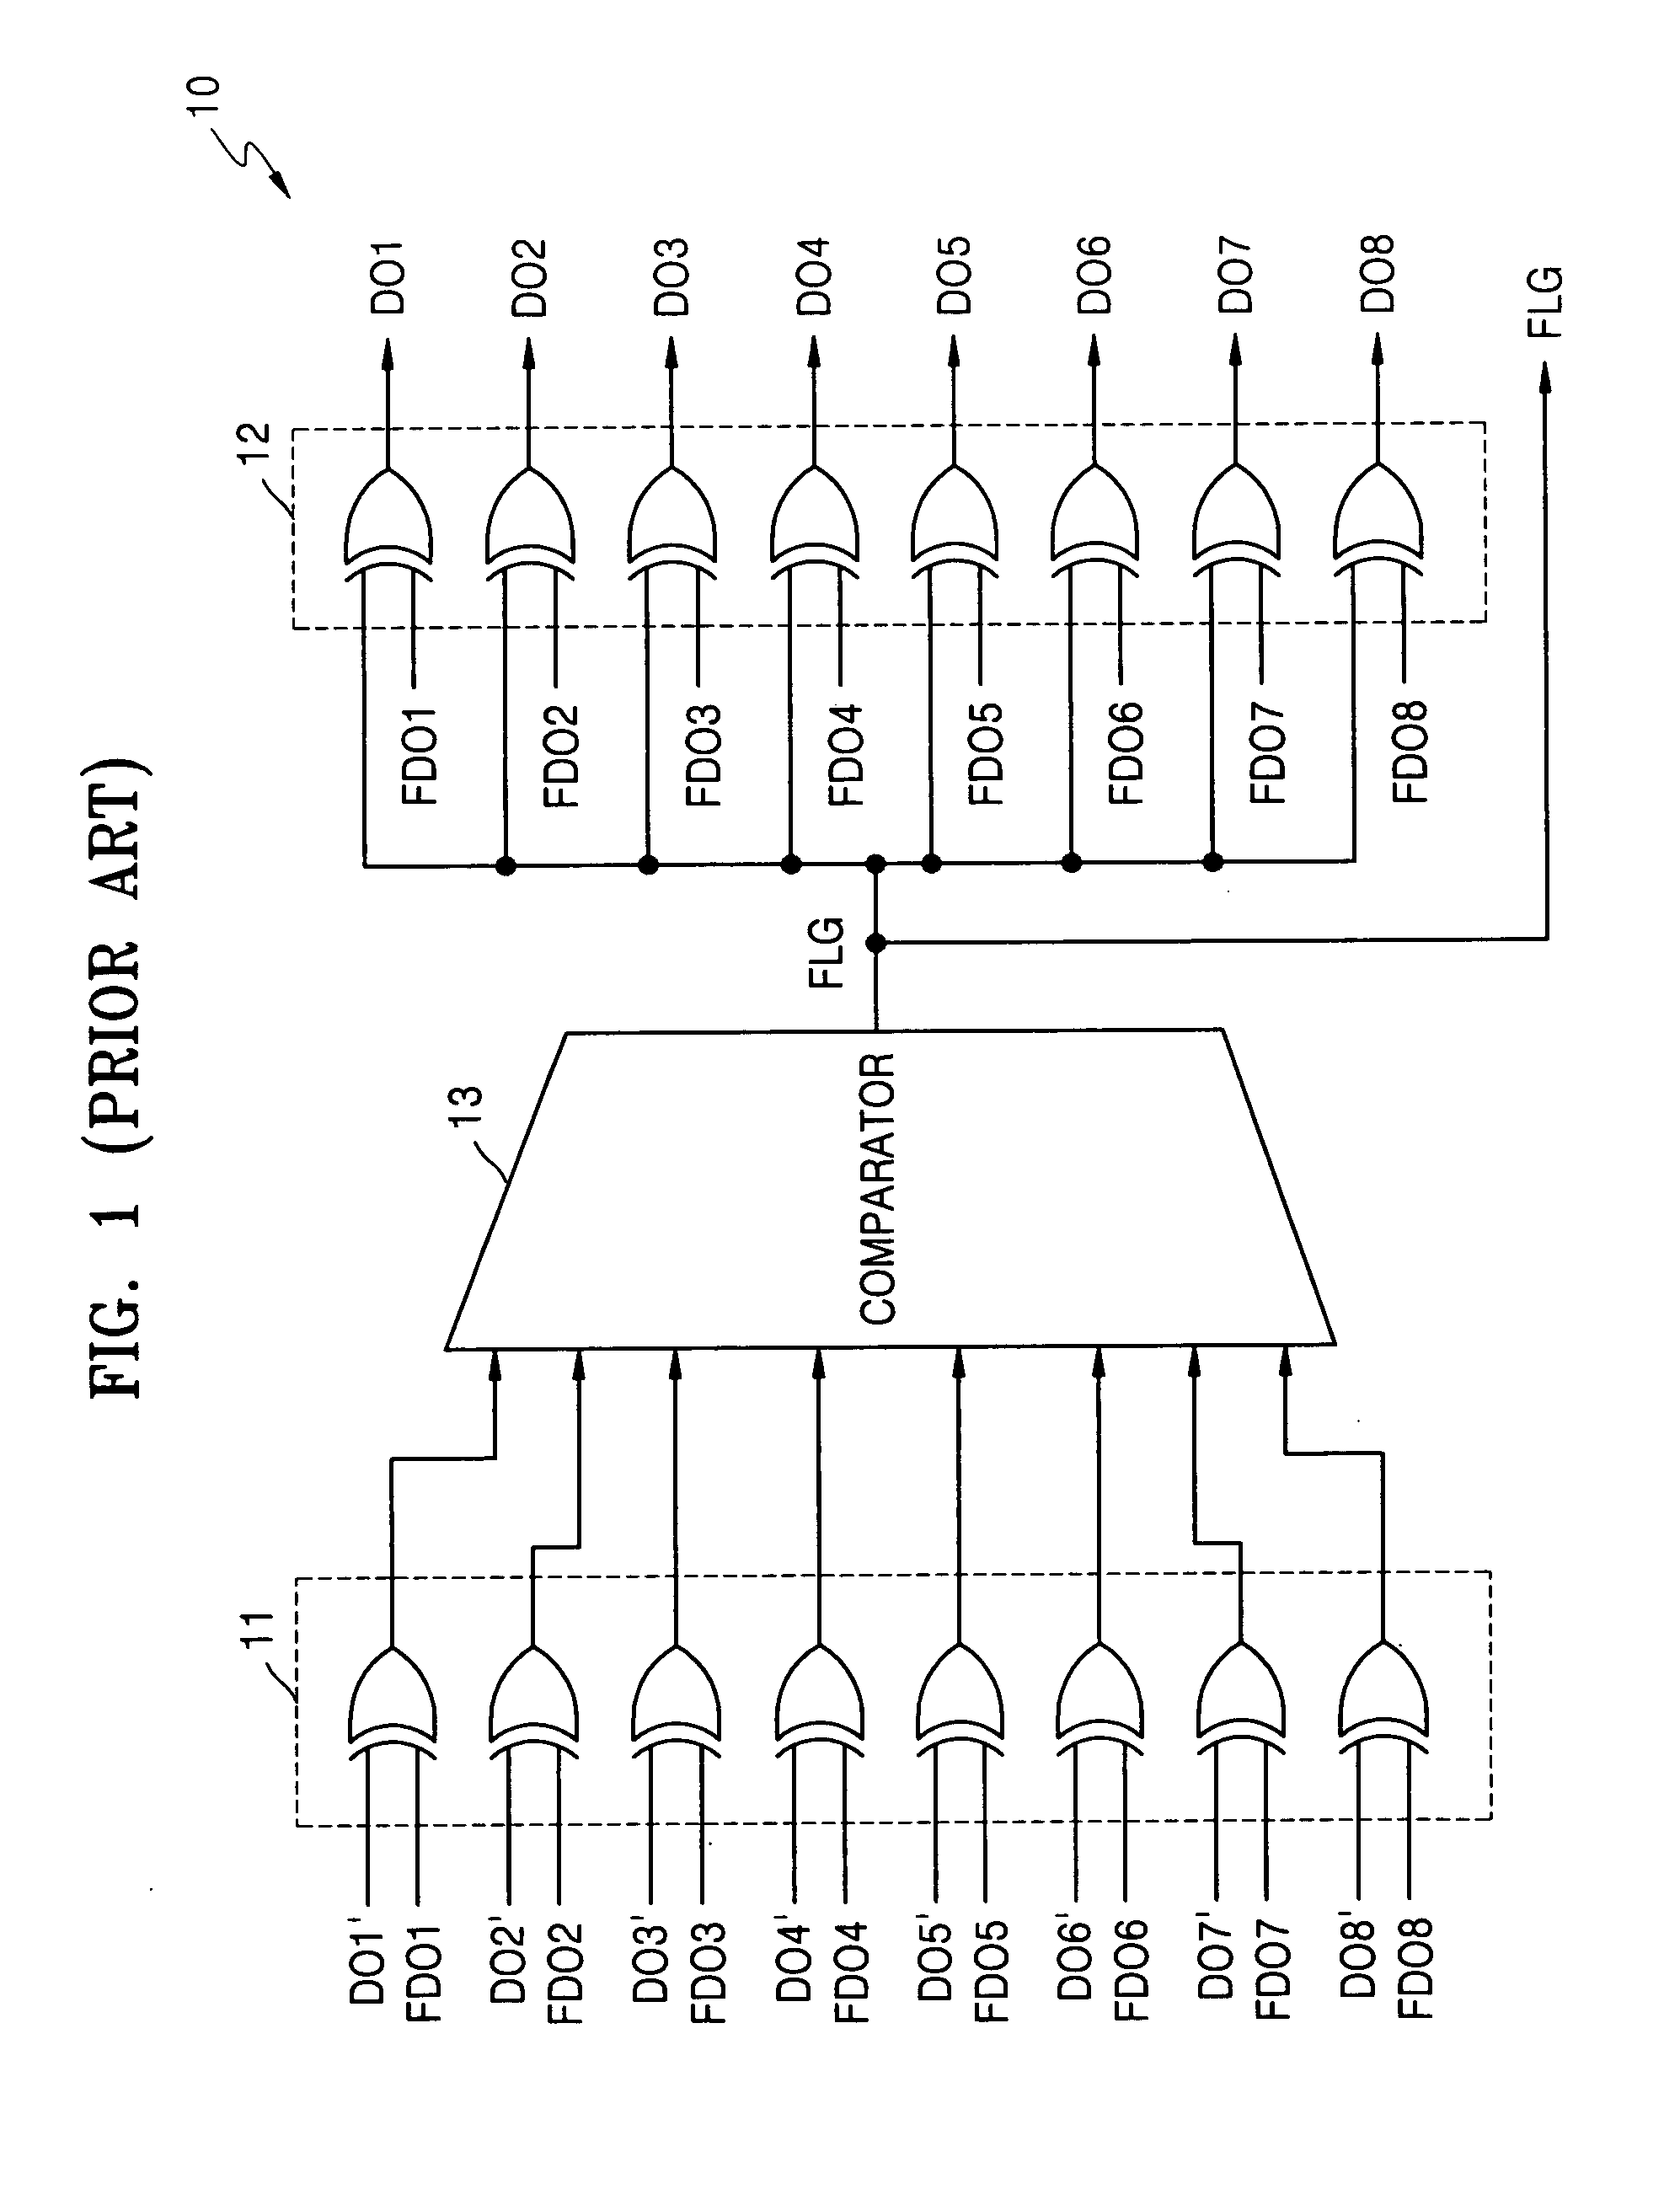 Data inversion circuits having a bypass mode of operation and methods of operating the same